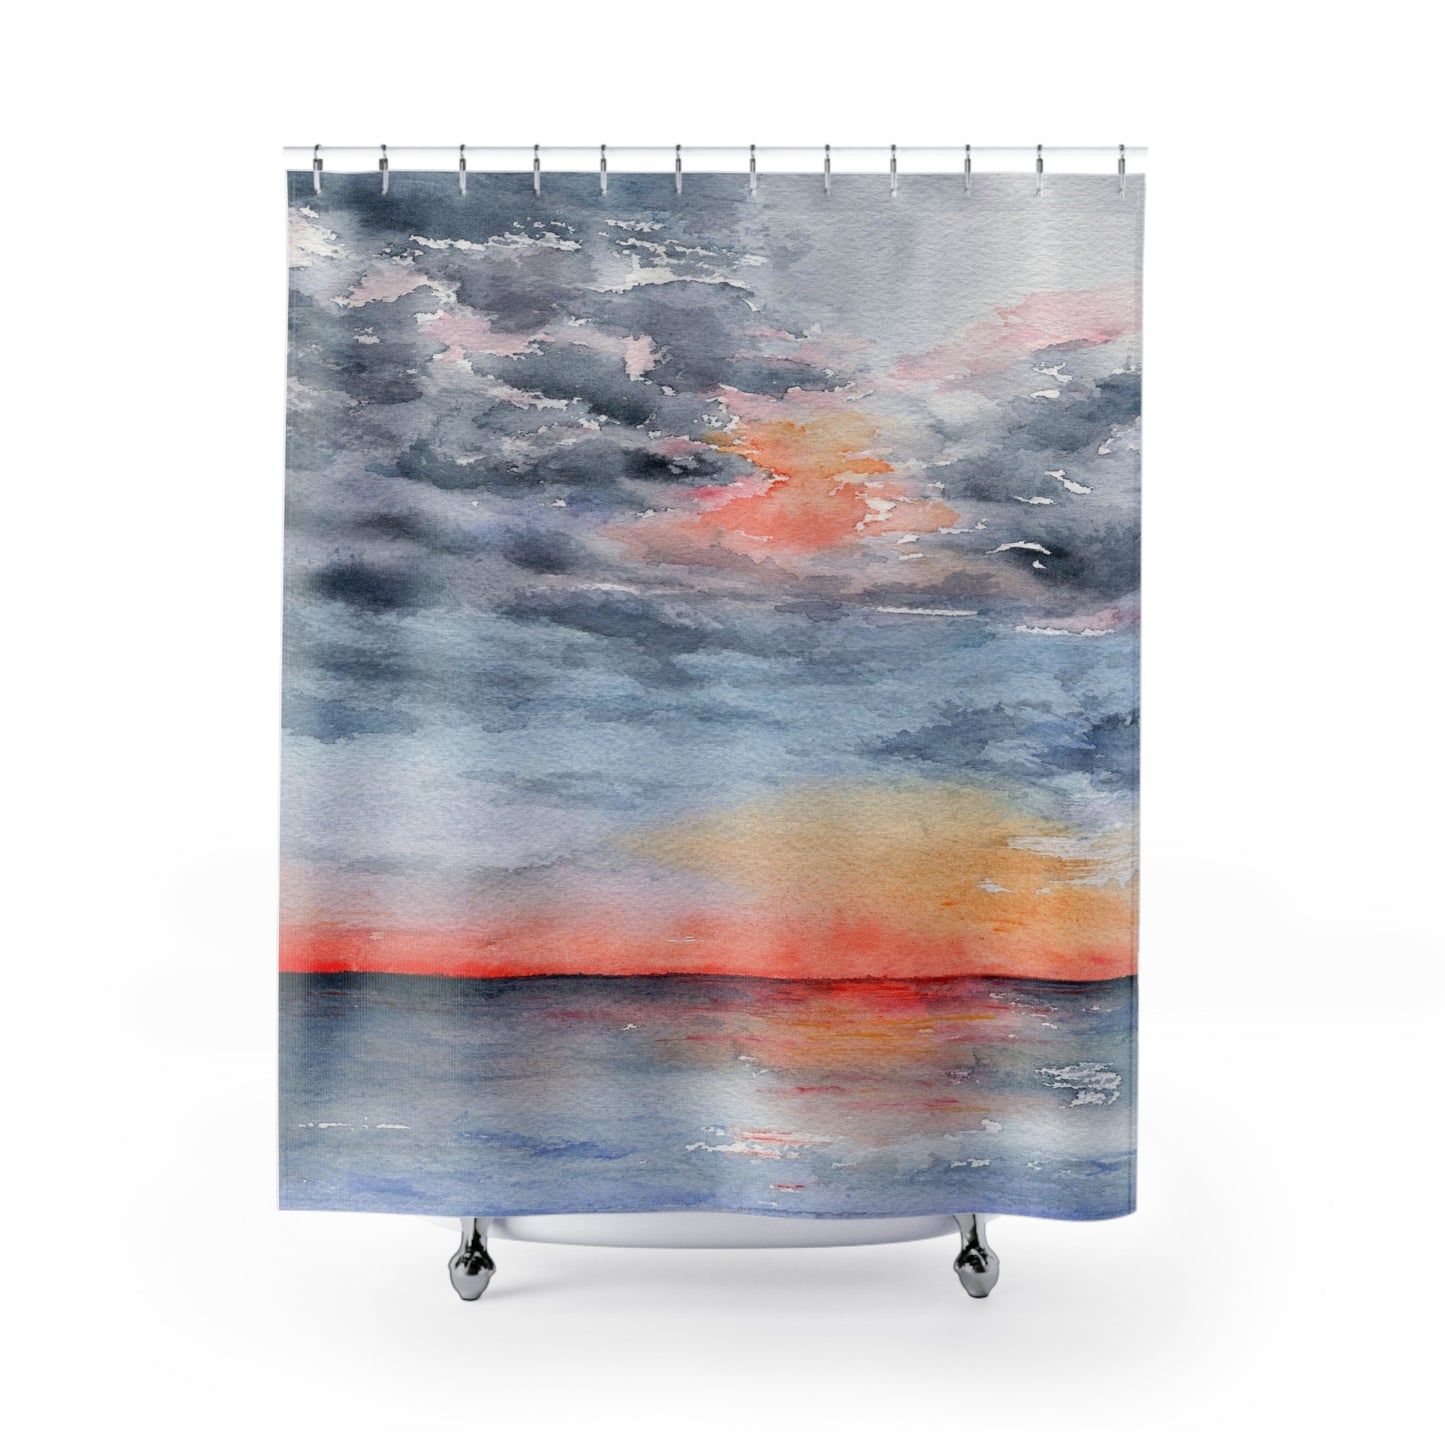 Moment of Tranquility Shower Curtain